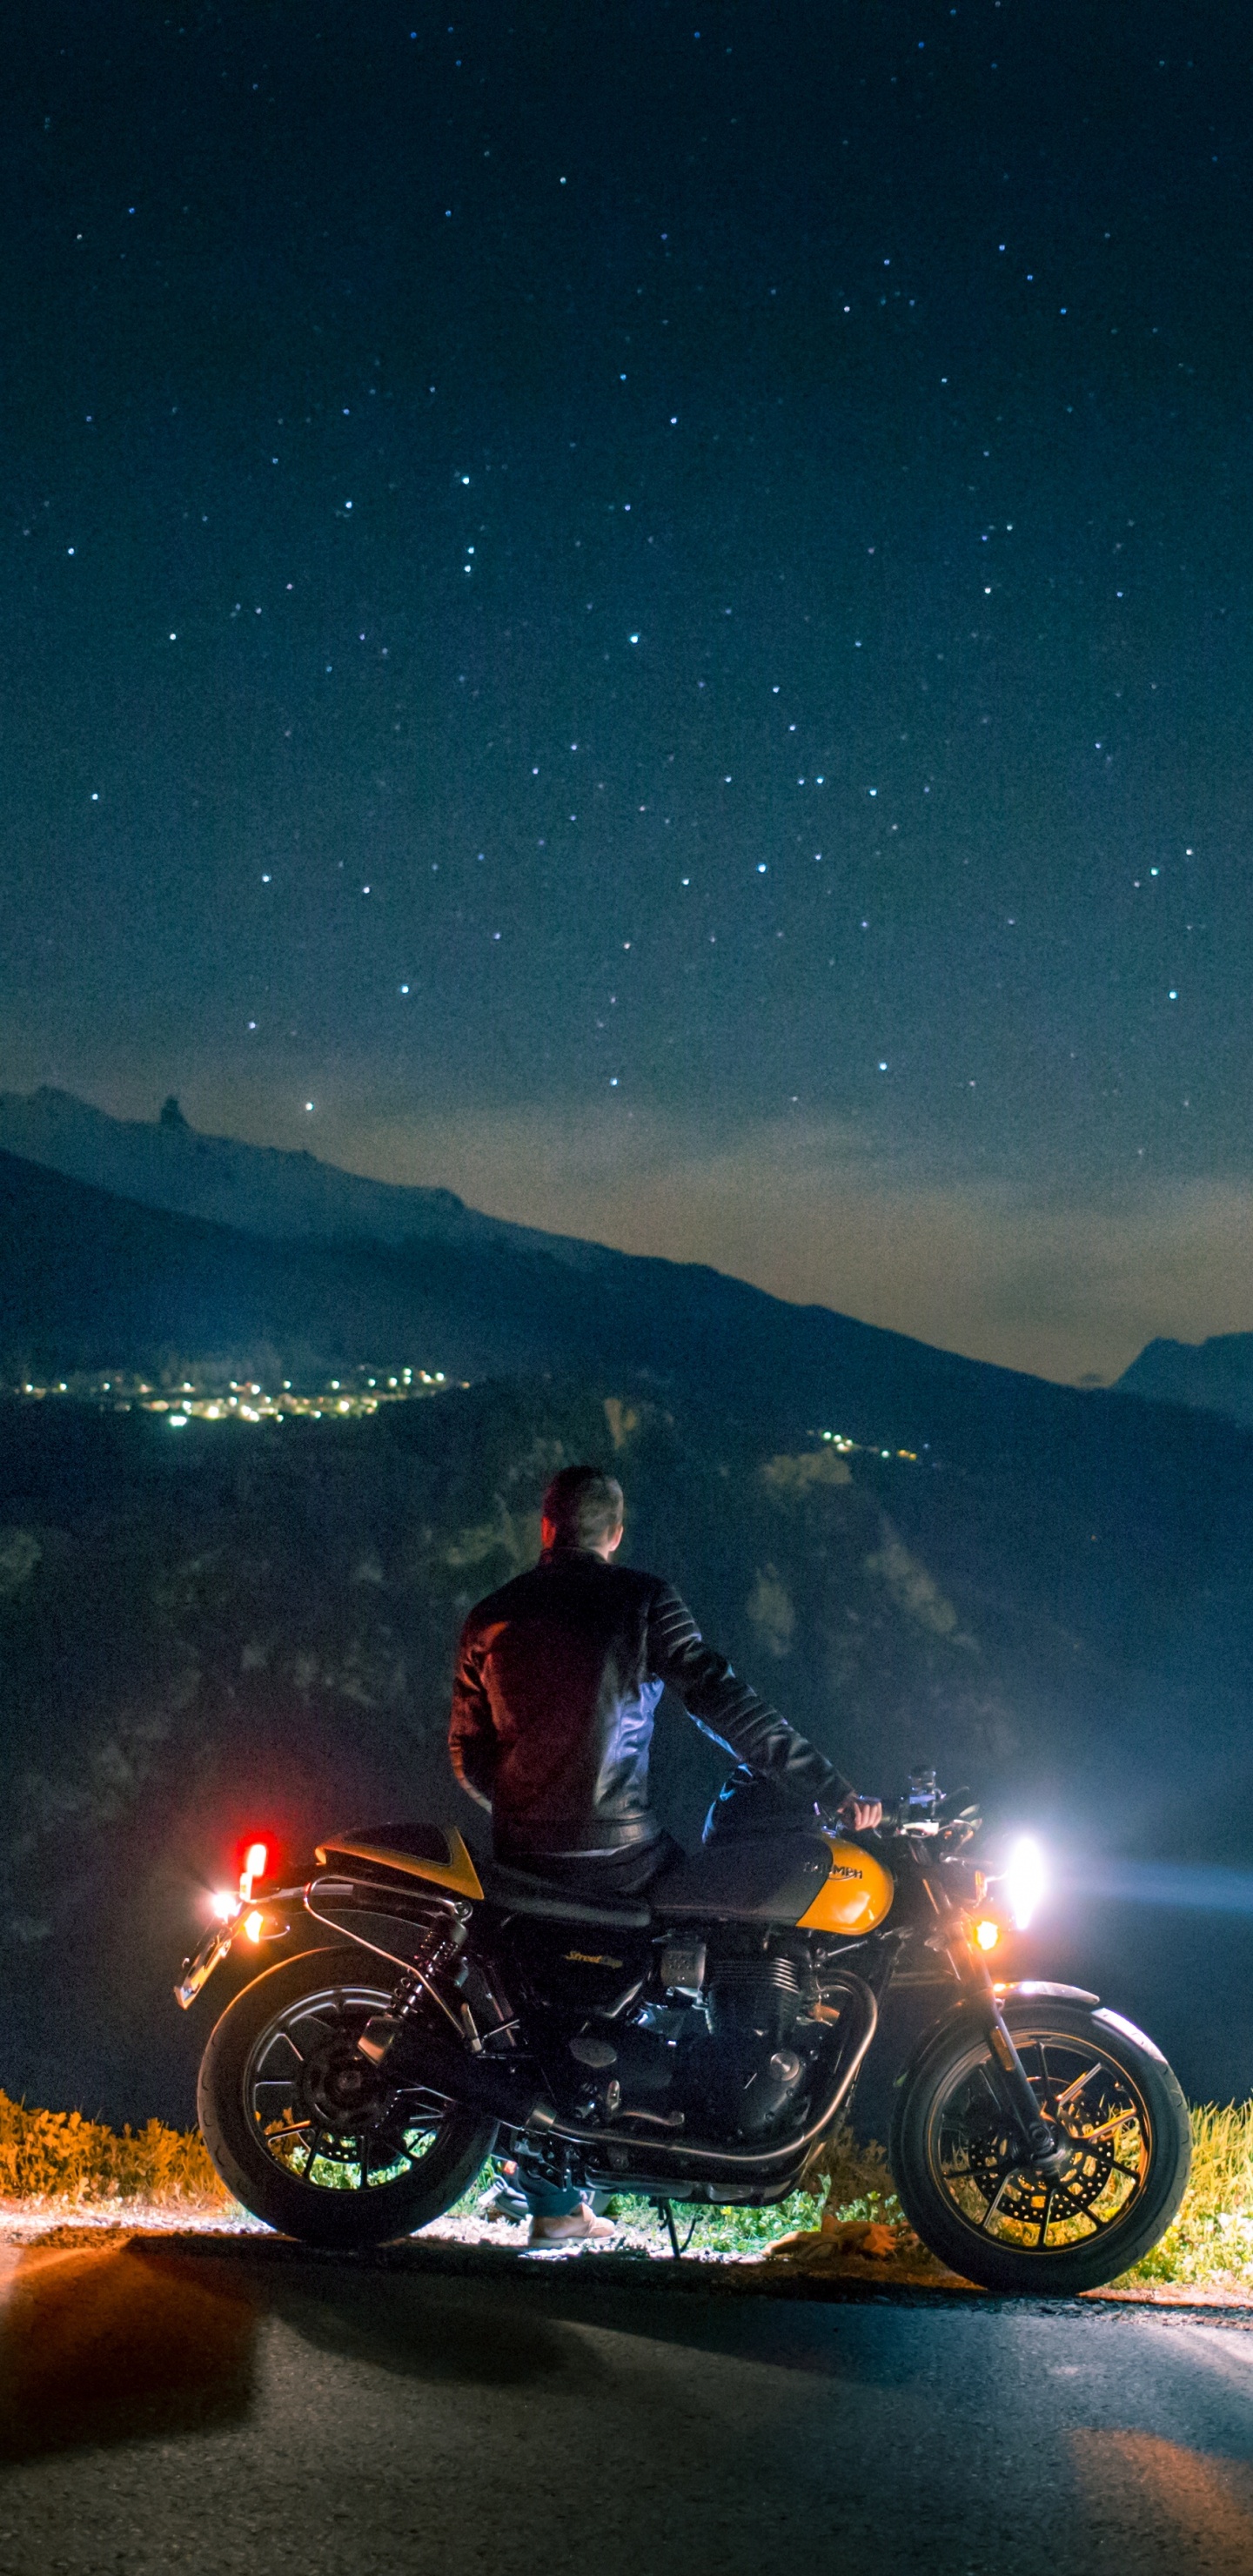 Man Riding Motorcycle on Road During Night Time. Wallpaper in 1440x2960 Resolution